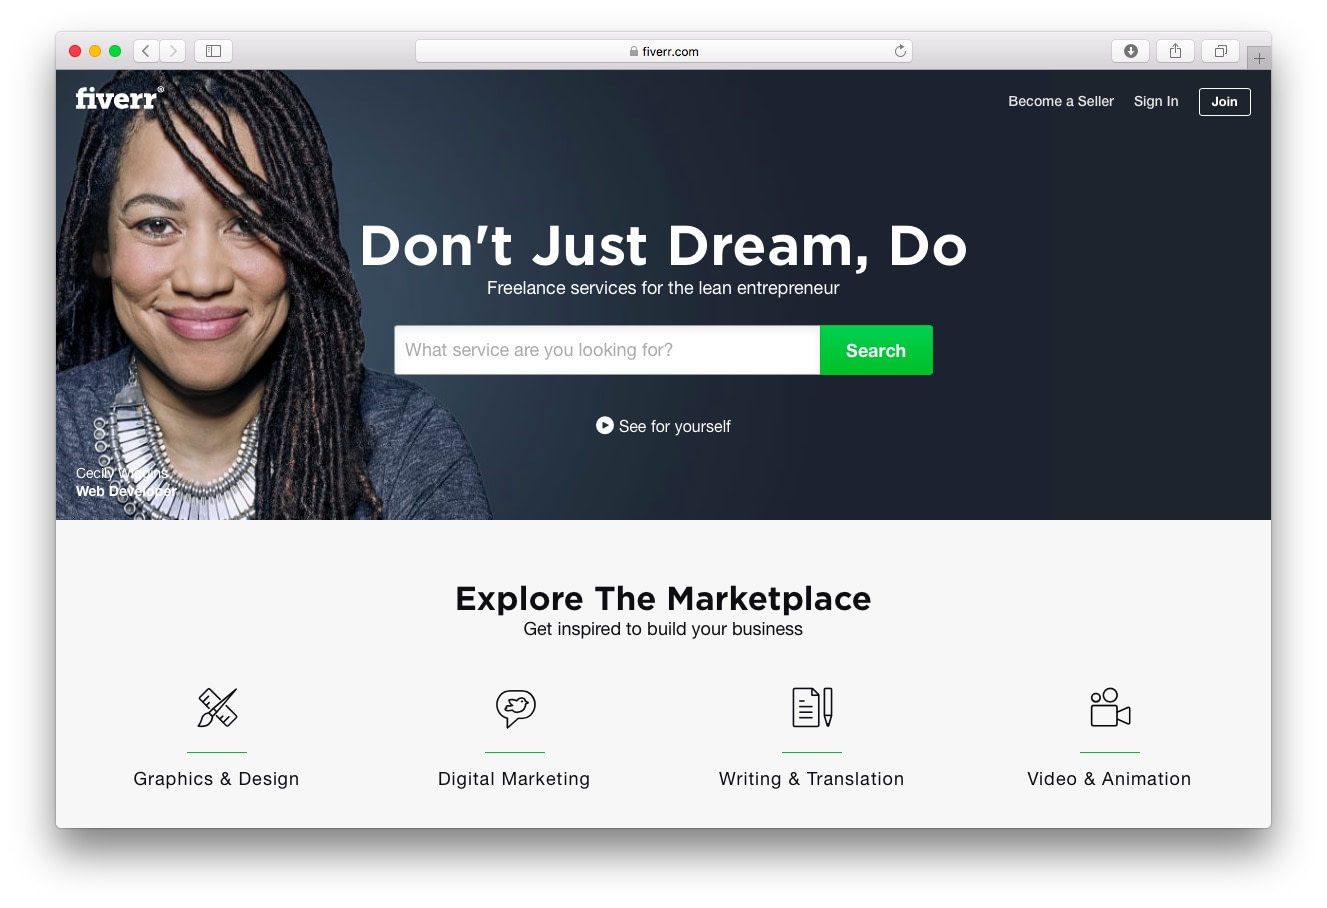 The Fiverr homepage